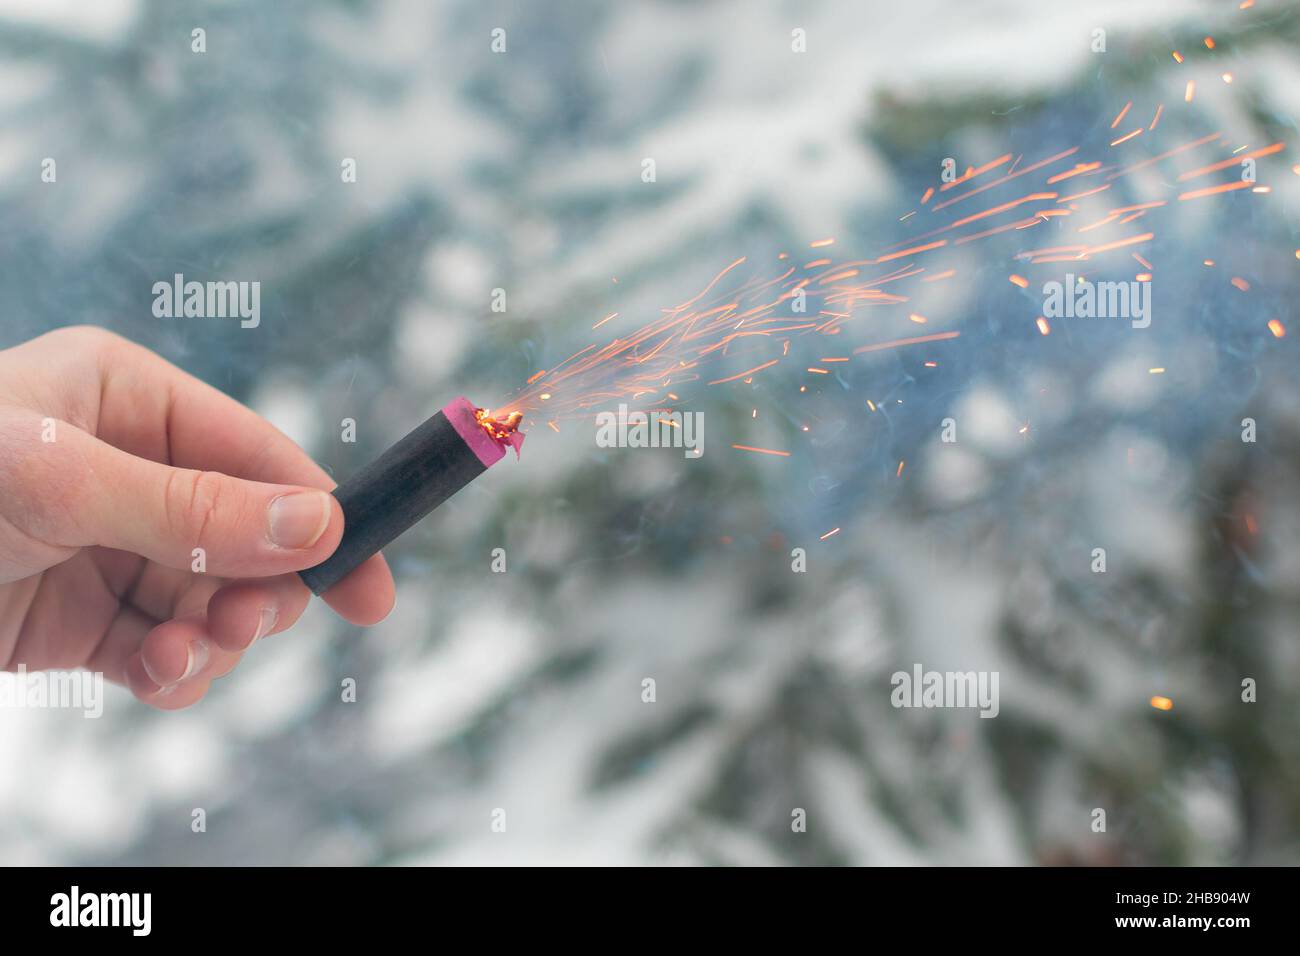 Burning Firecracker in a Hand. Guy Holding a Petard Outdoors in Winter at Daytime. Loud and Dangerous New Year's Entertainment. Hooliganism with Pyrot Stock Photo